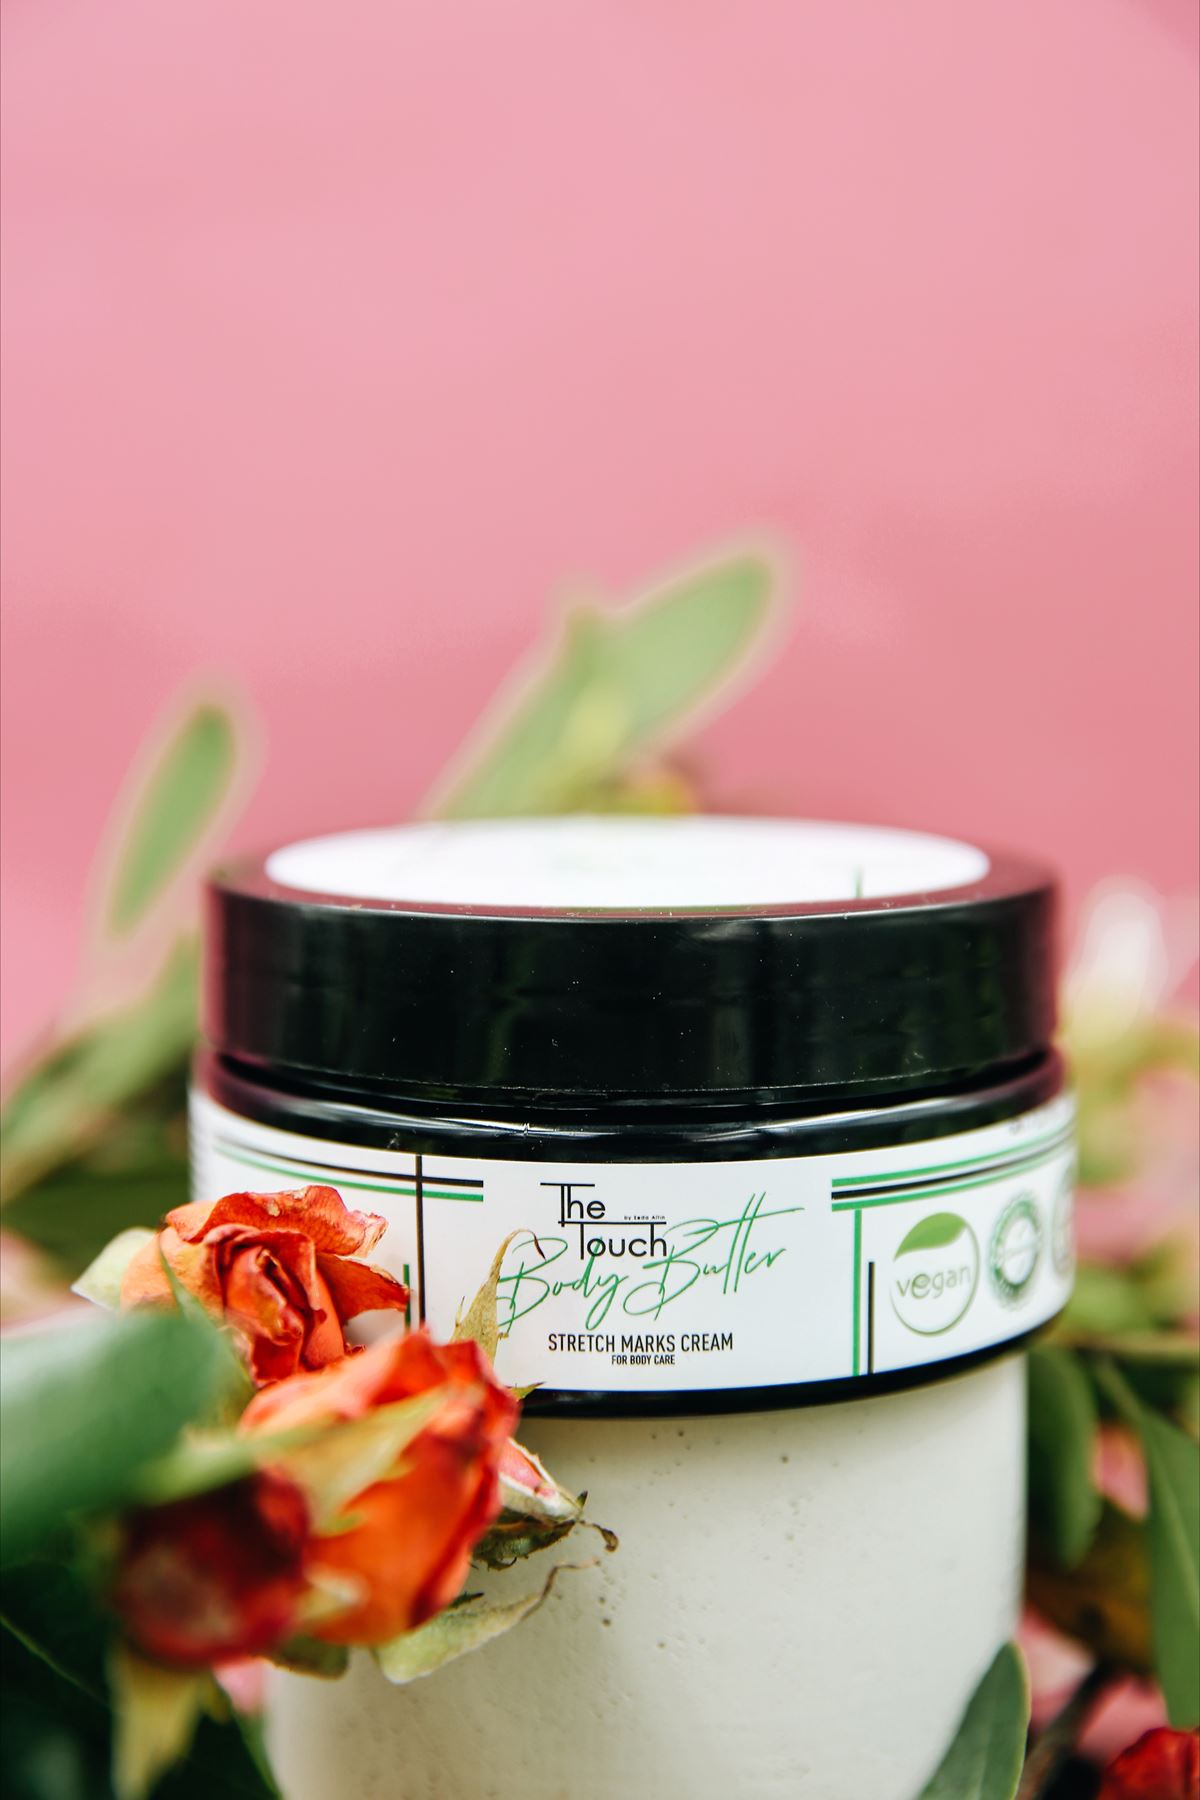 THE TOUCH STRETCH MARKS CREAM